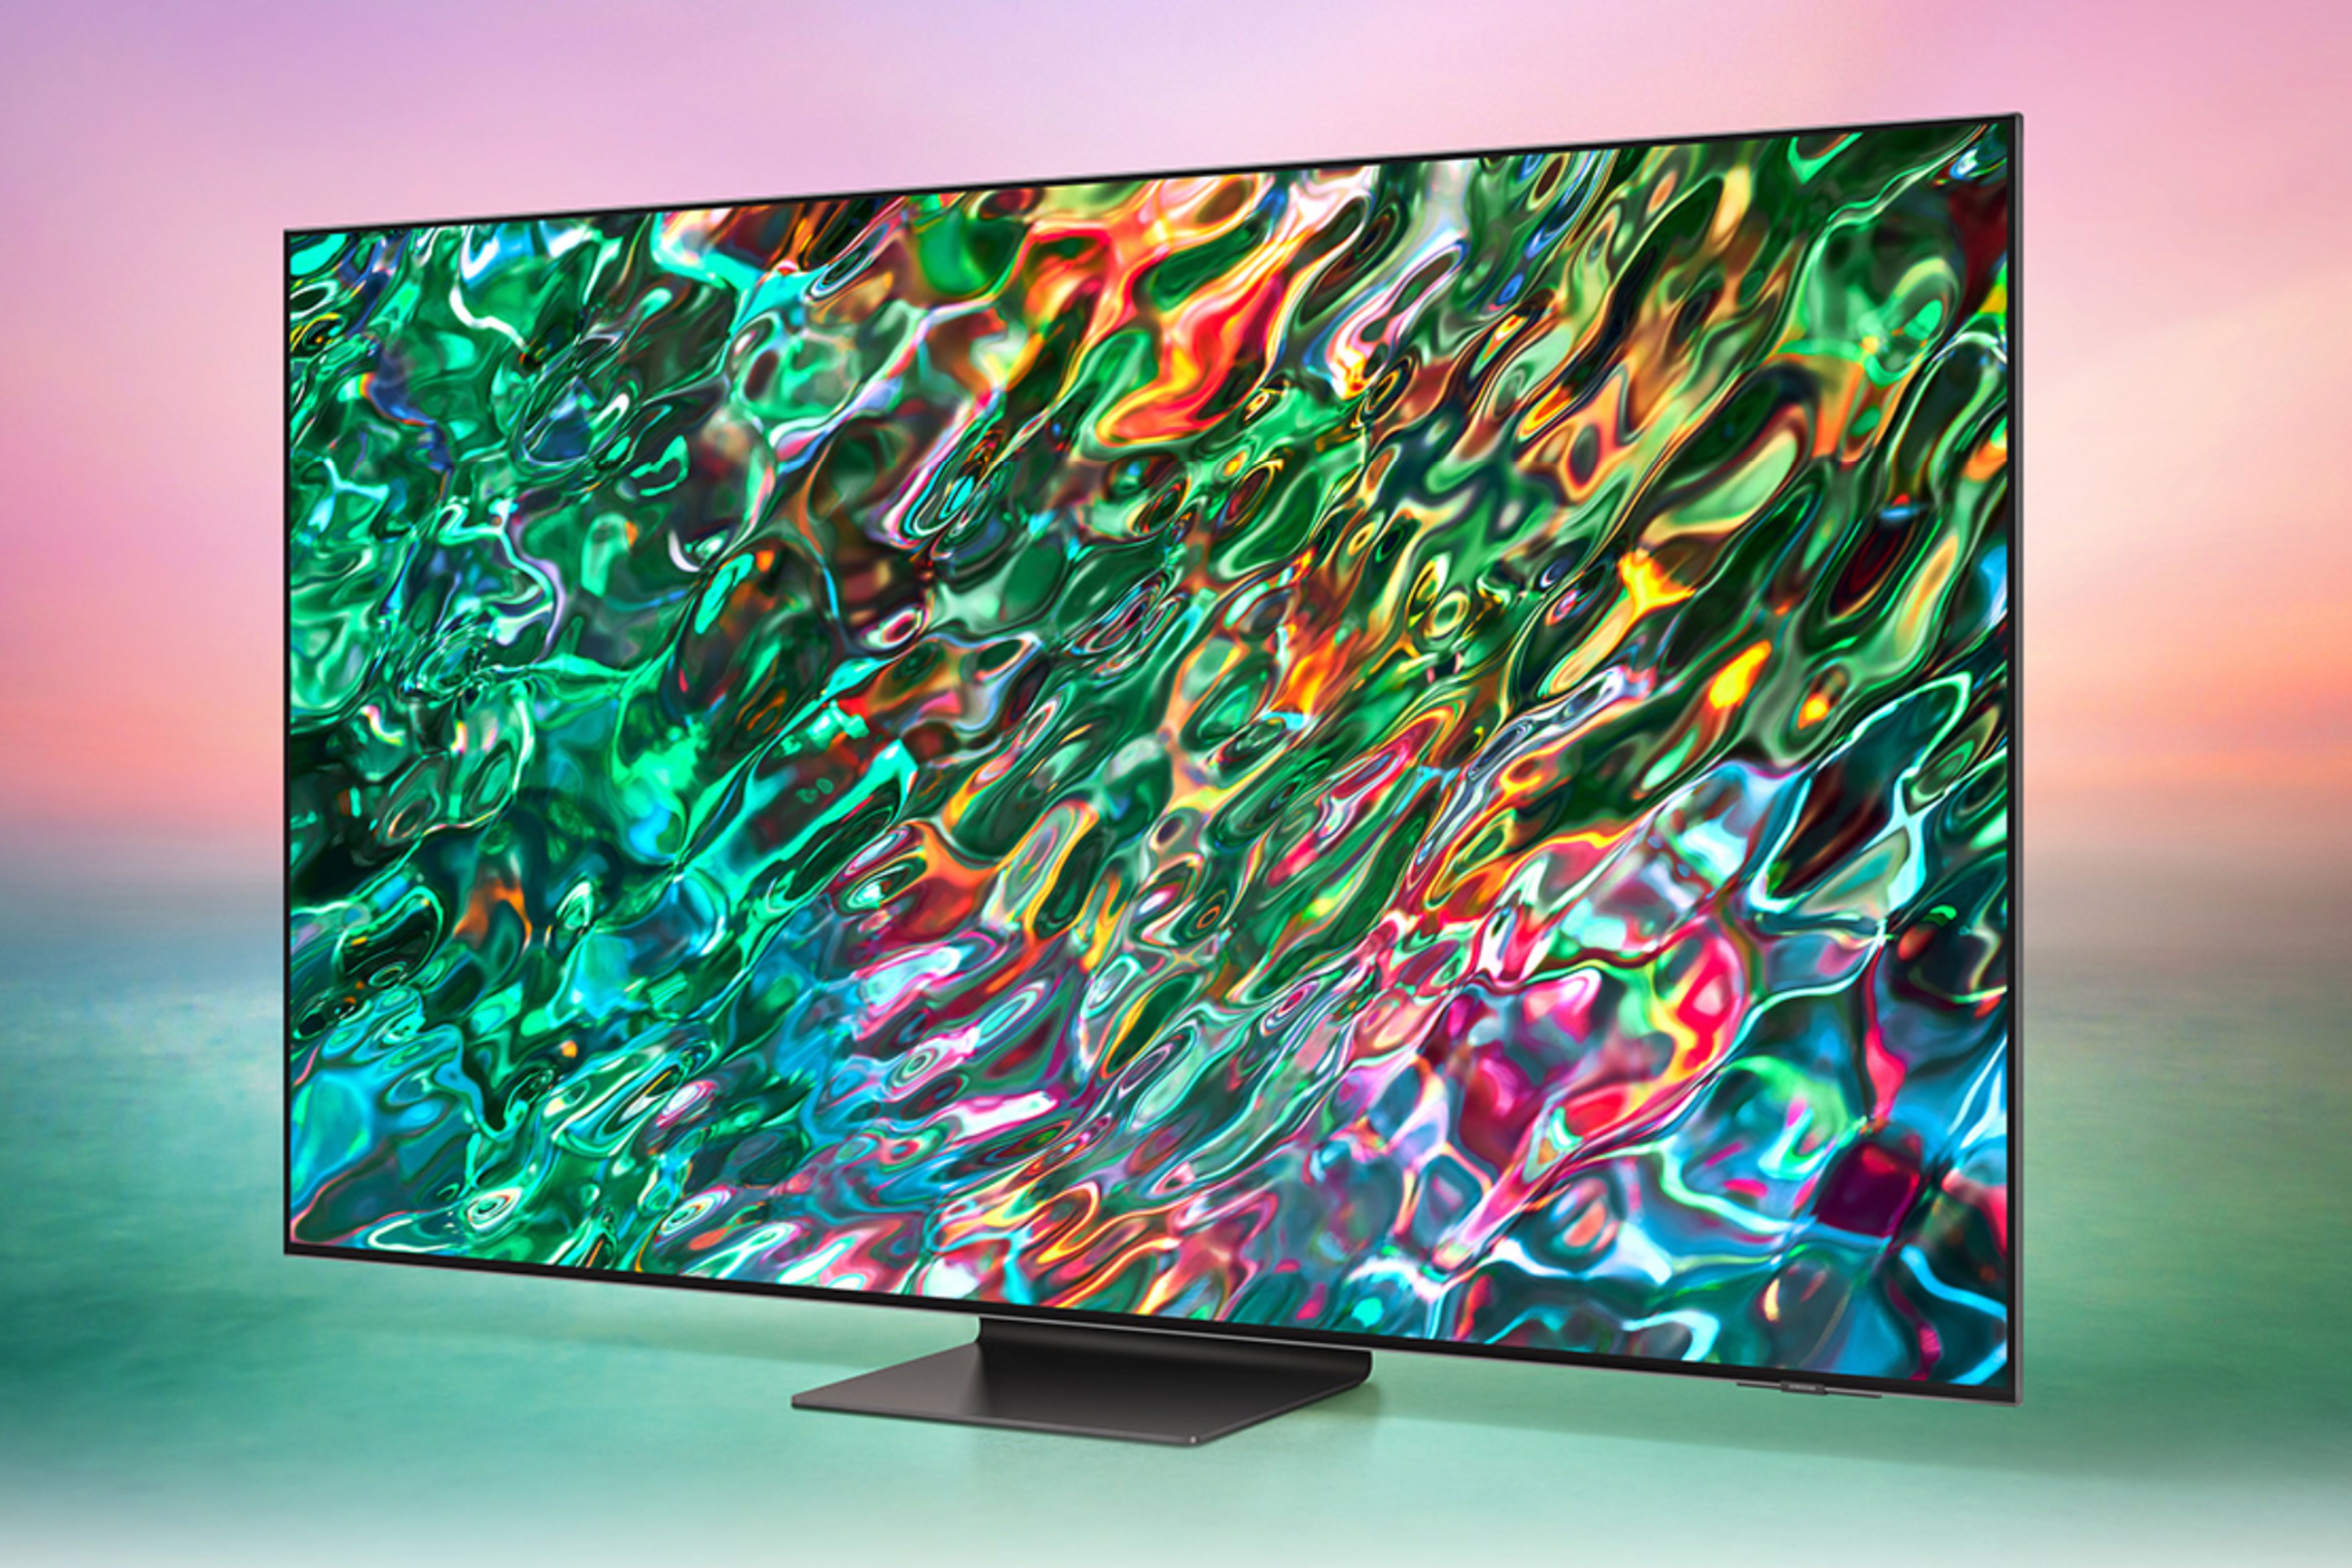 A promotional image of Samsung's 43-inch Class Neo 4K TV.